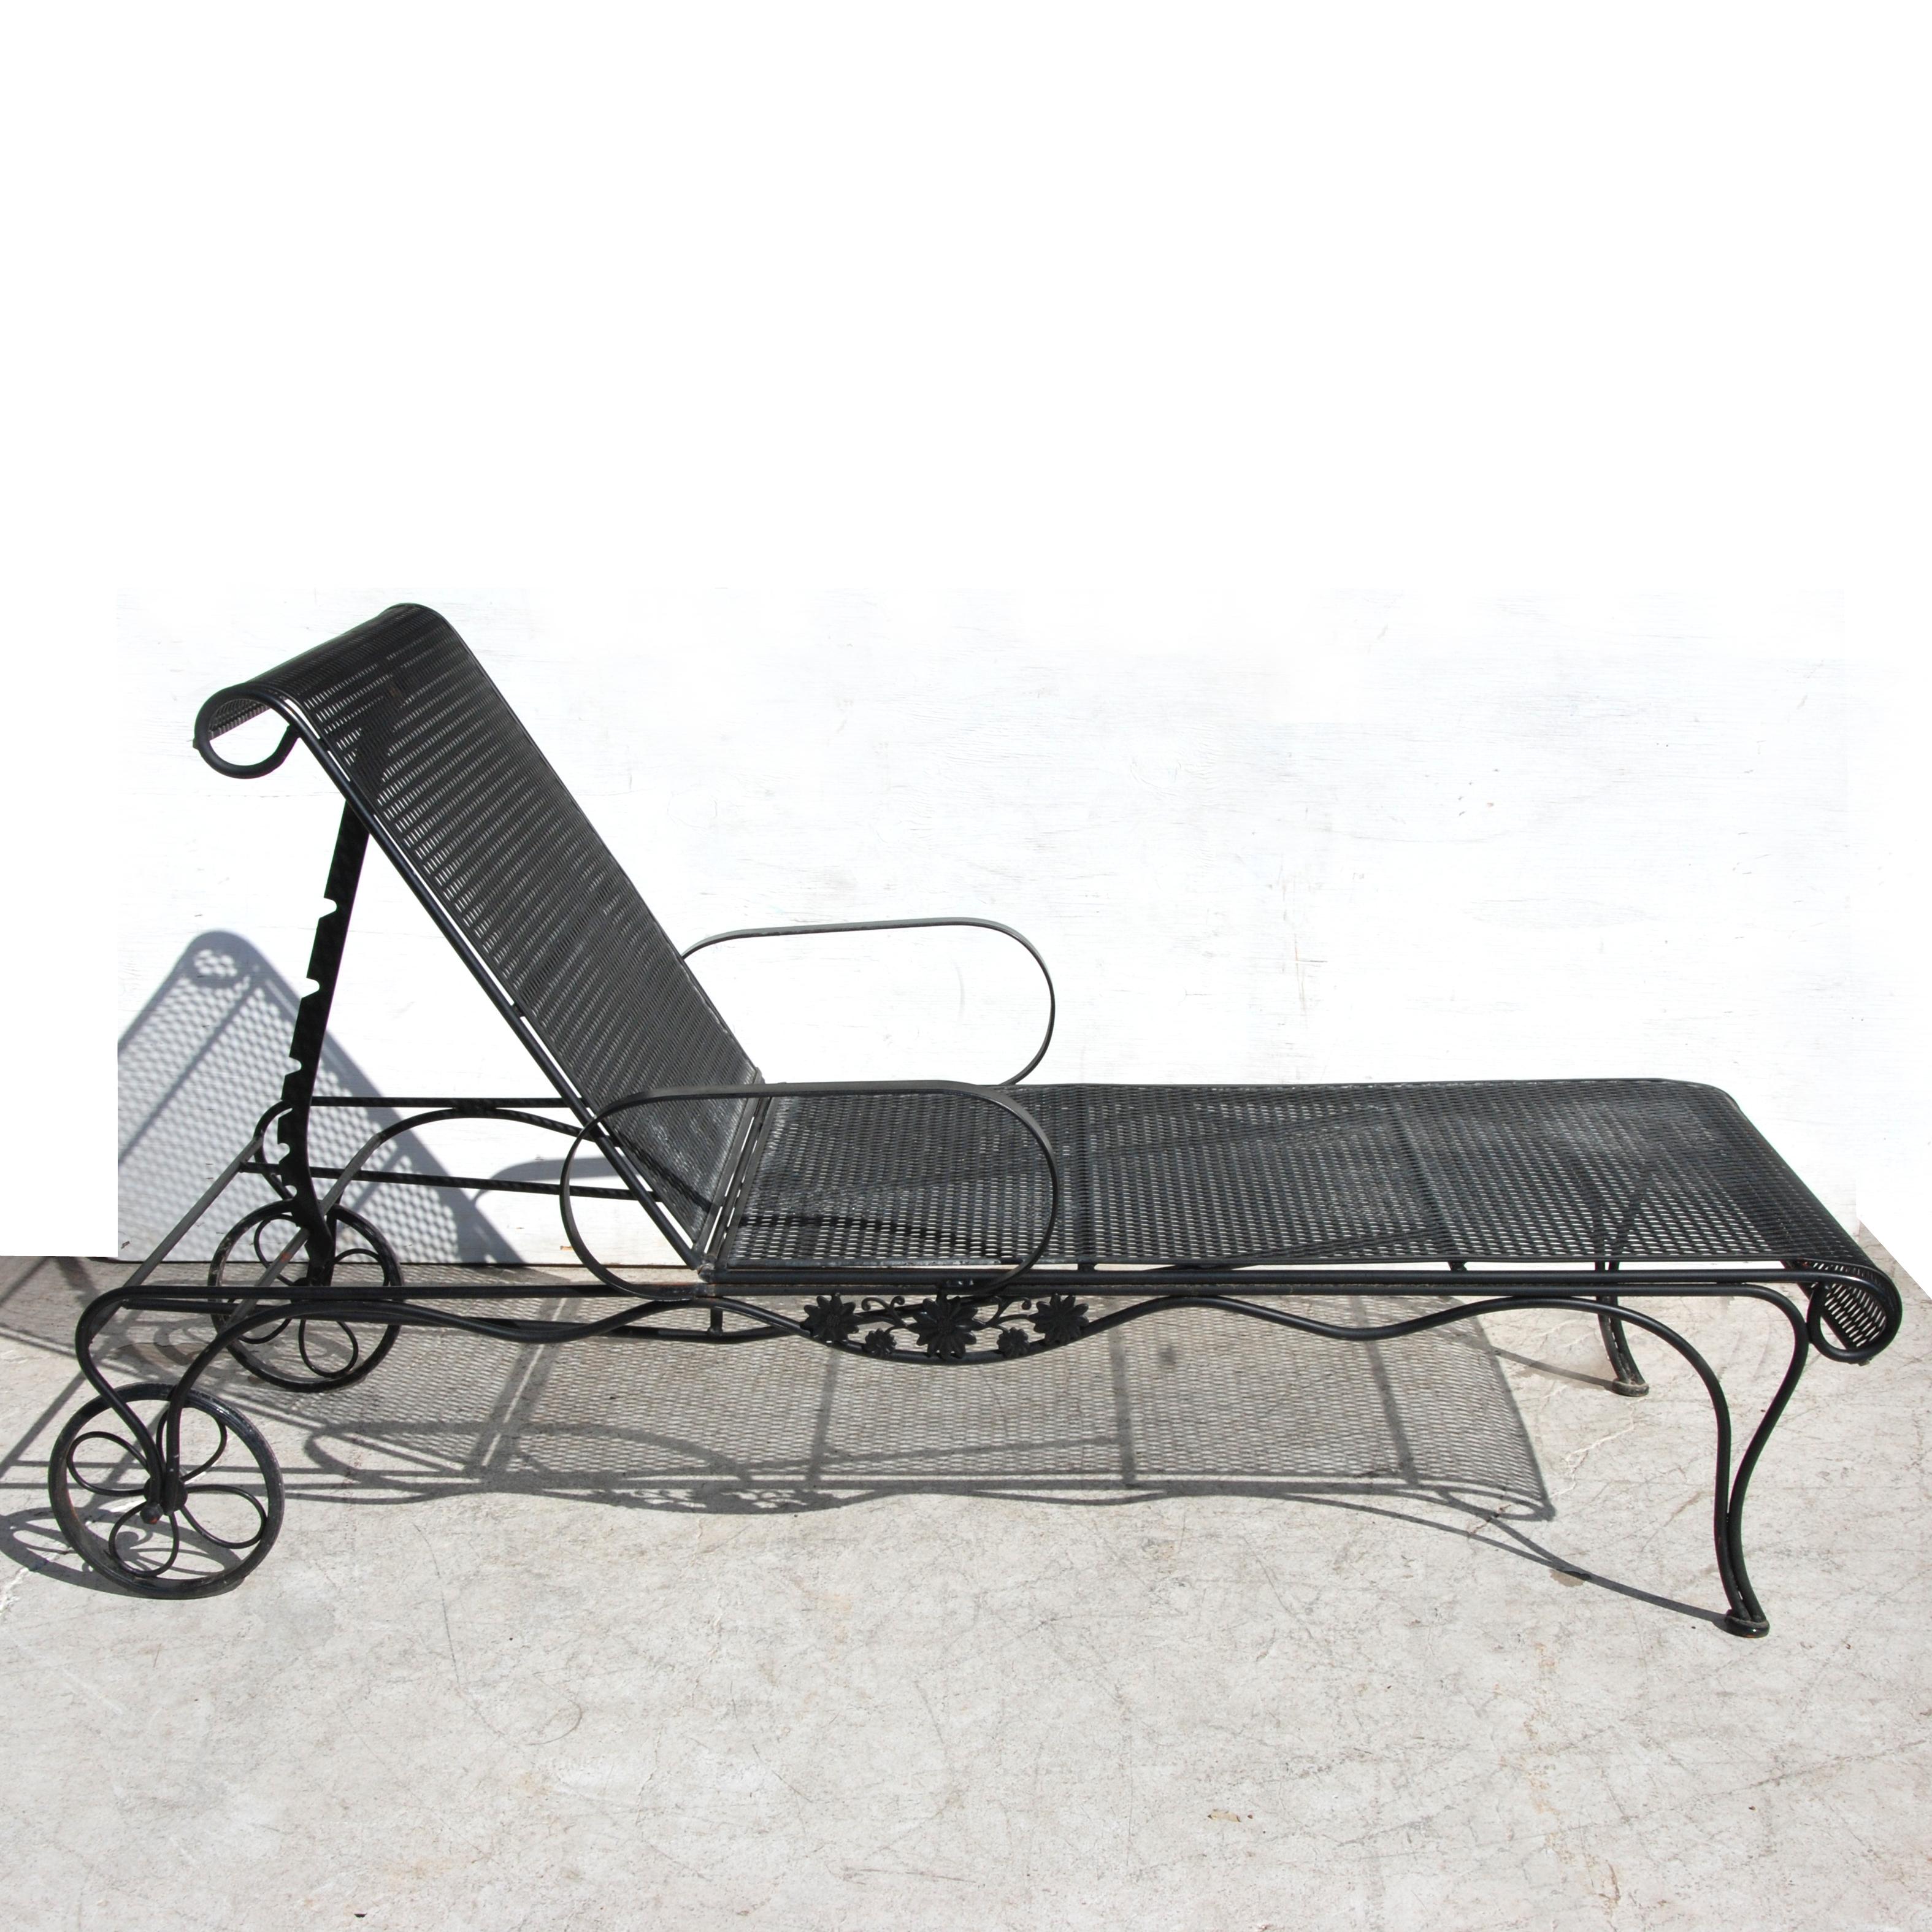 Woodard style wrought iron patio chaise lounge

Vintage Woodard style wrought iron adjustable chaise lounge from Europe.

Features adjustable backrest and wheels for movability.
 

 Measurements: 37.5